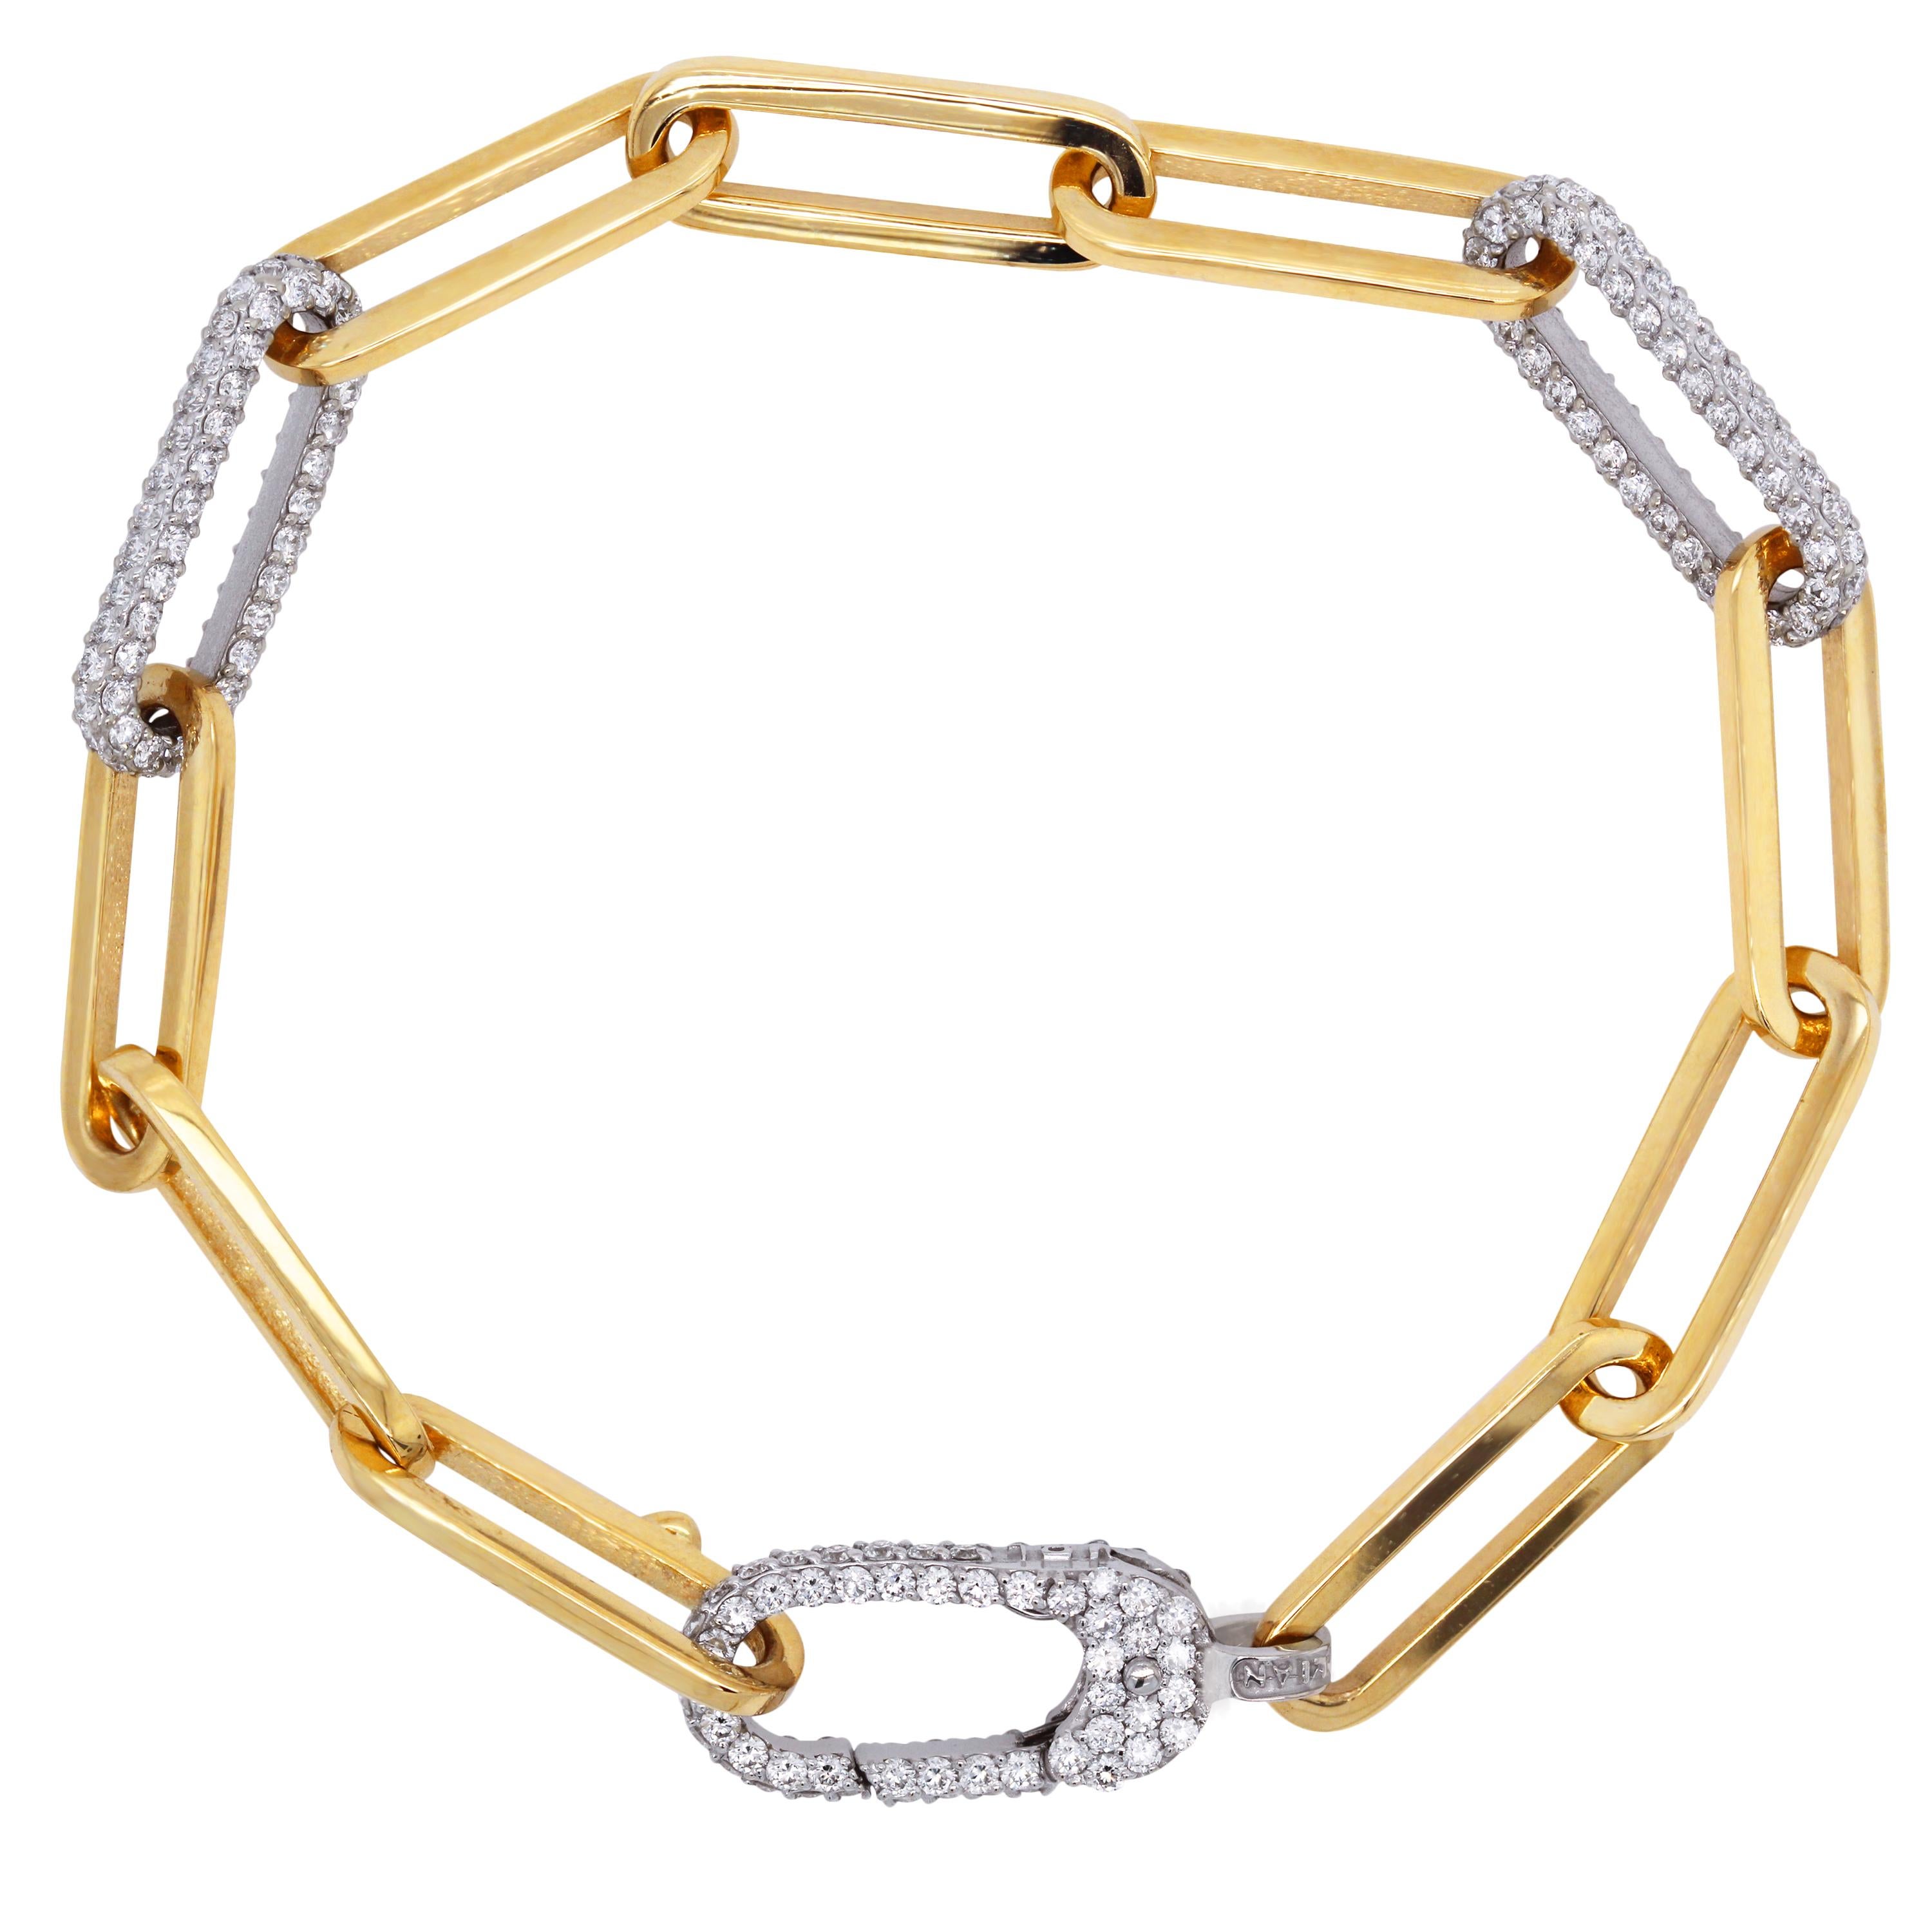 Stambolian 18 Karat Yellow White Two Tone Gold Diamond Paper Clip Link Bracelet

This paper clip bracelet by Stambolian features a high-polished yellow gold finish with two pavé-set diamond links along with an all diamond clasp.

2.46 carat G color,